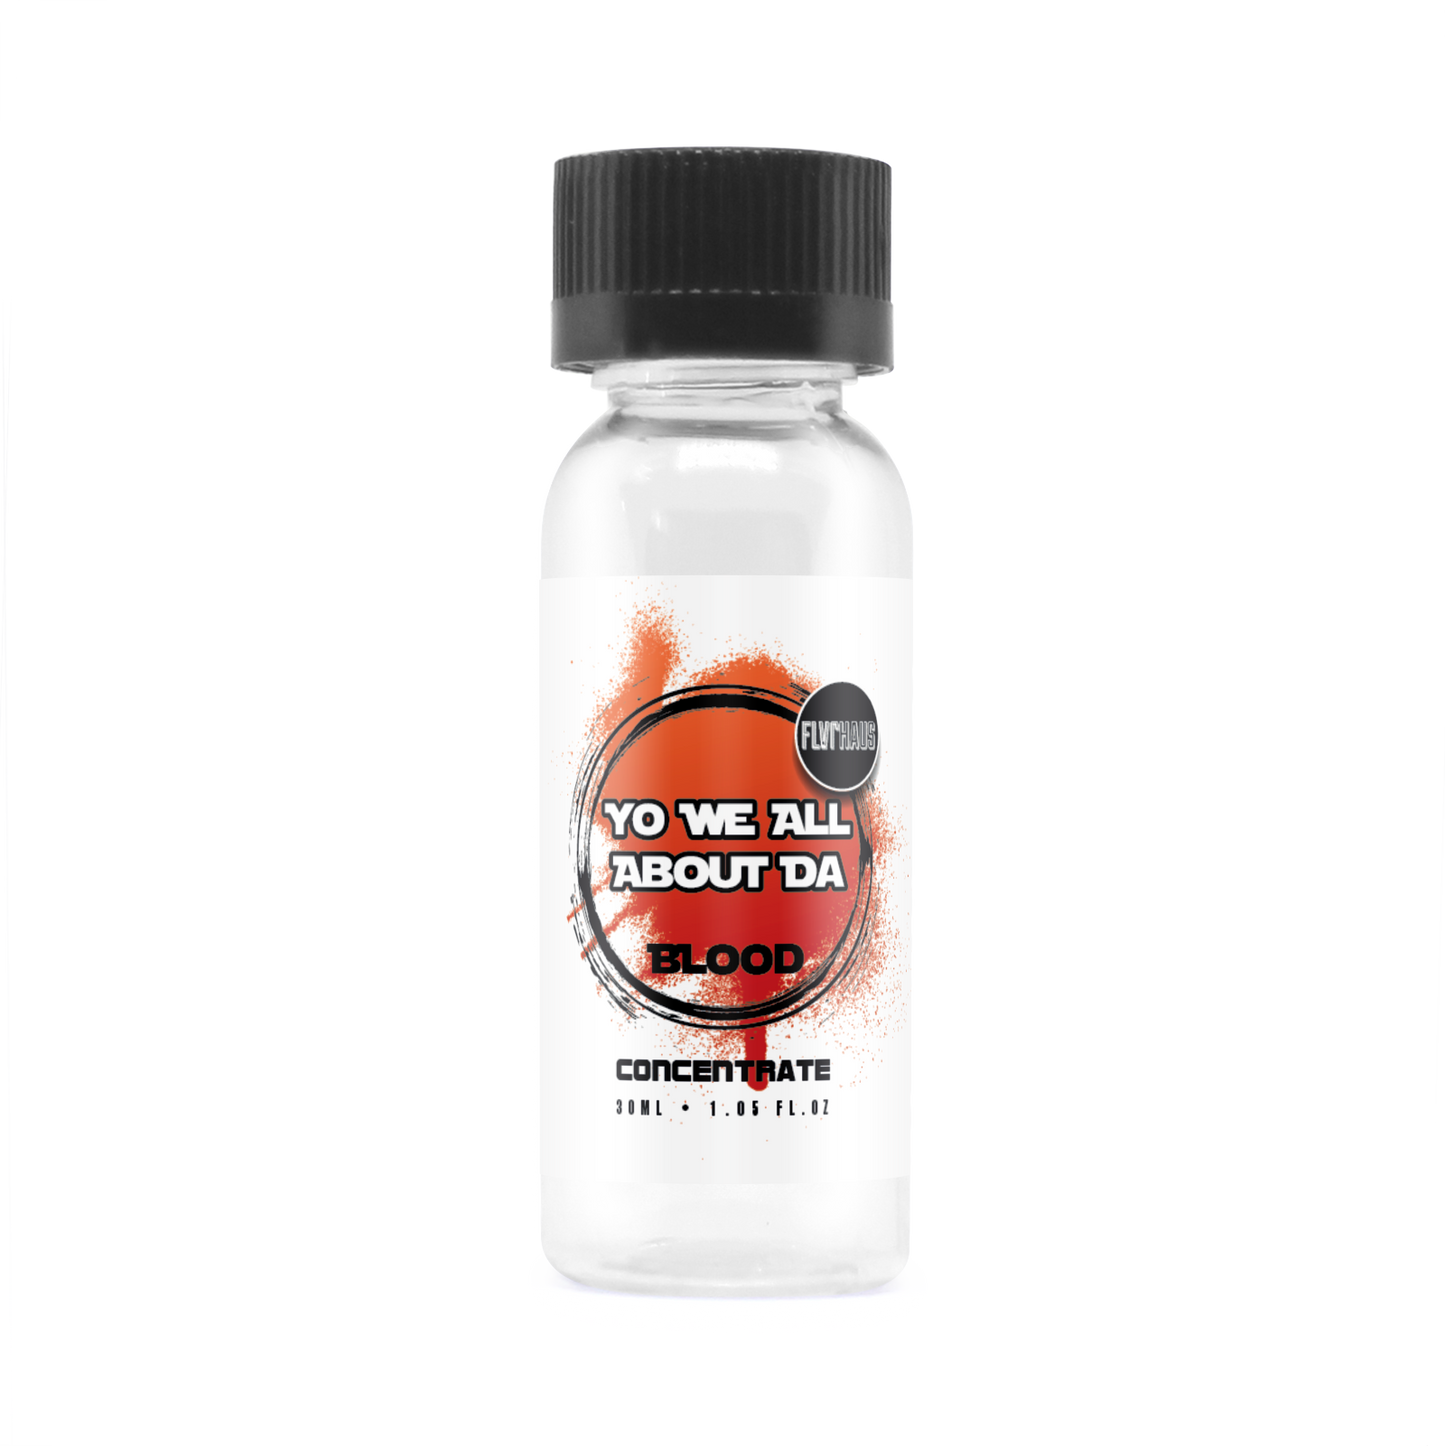 Cloud Chasers - Blood 30ml Concentrate by FLVRHAUS - The Ace Of Vapez